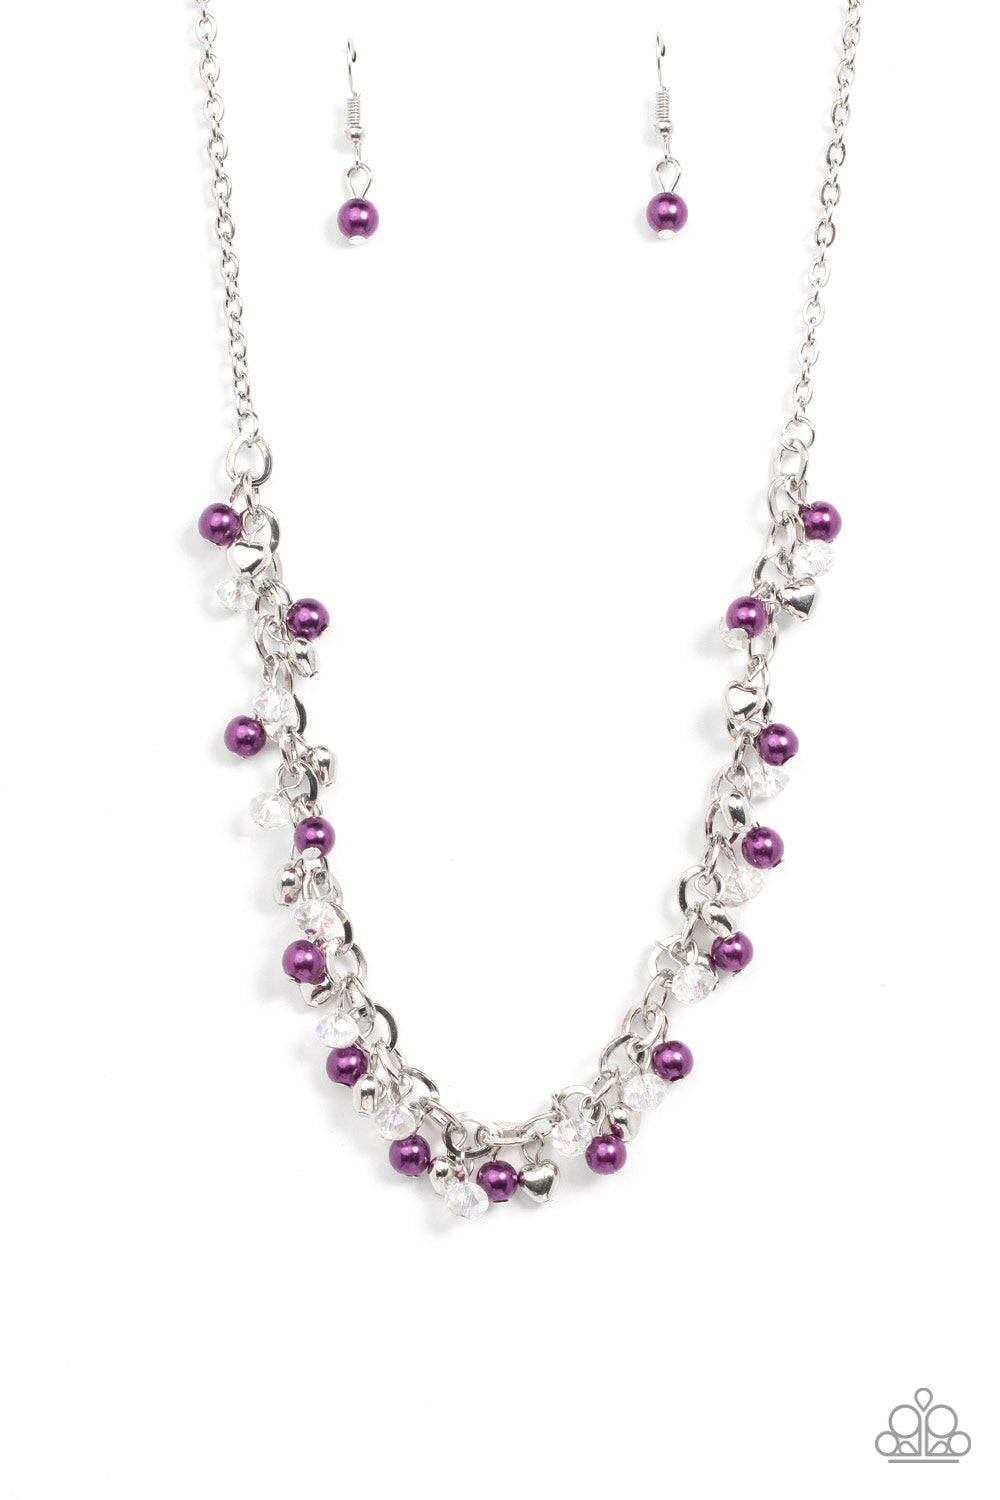 Soft-Hearted Shimmer - purple - Paparazzi necklace